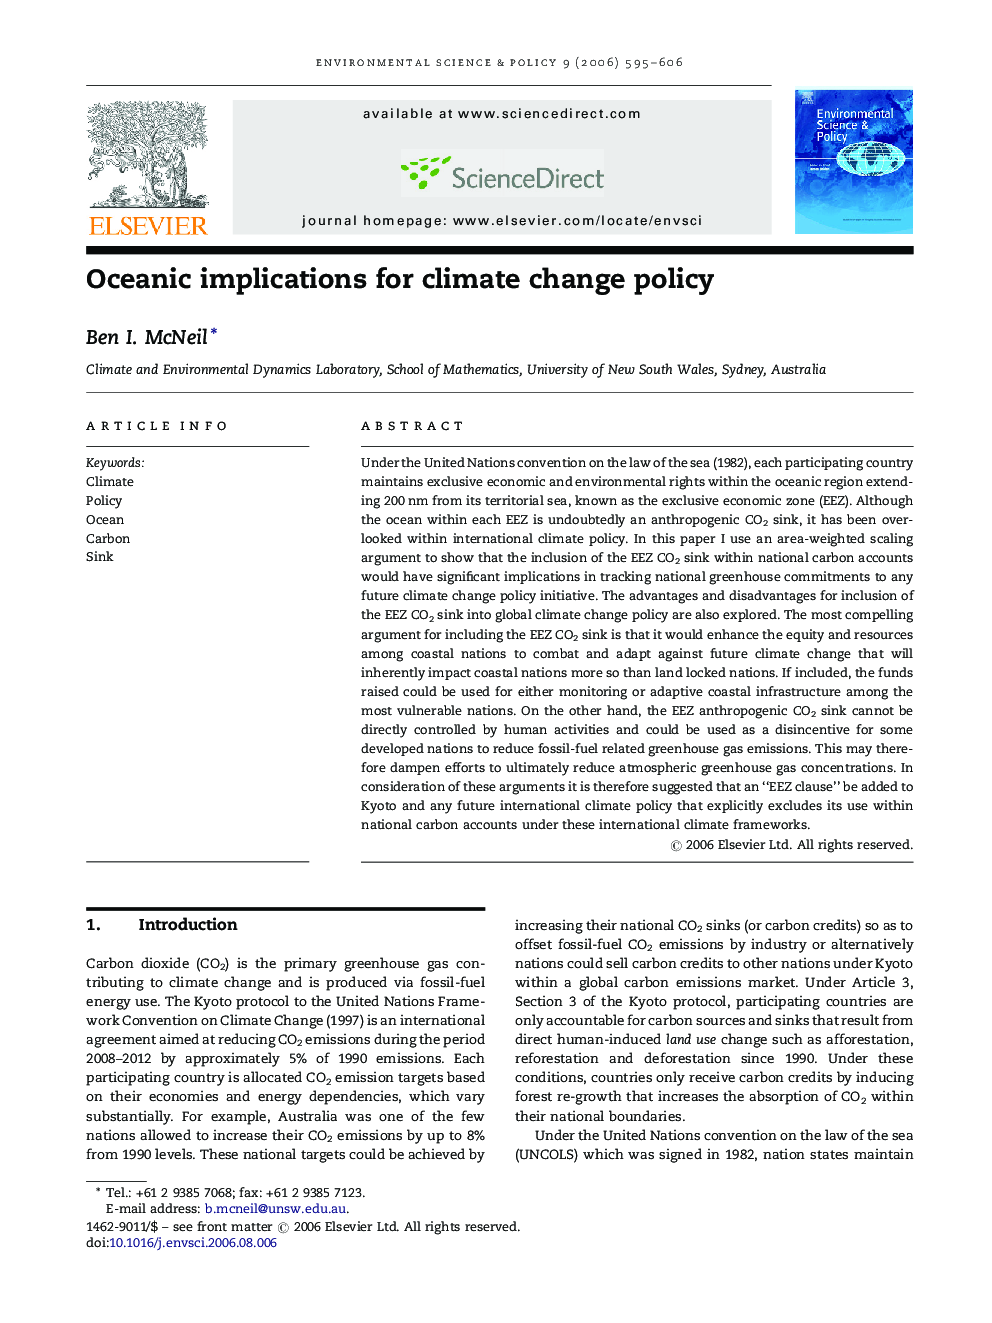 Oceanic implications for climate change policy